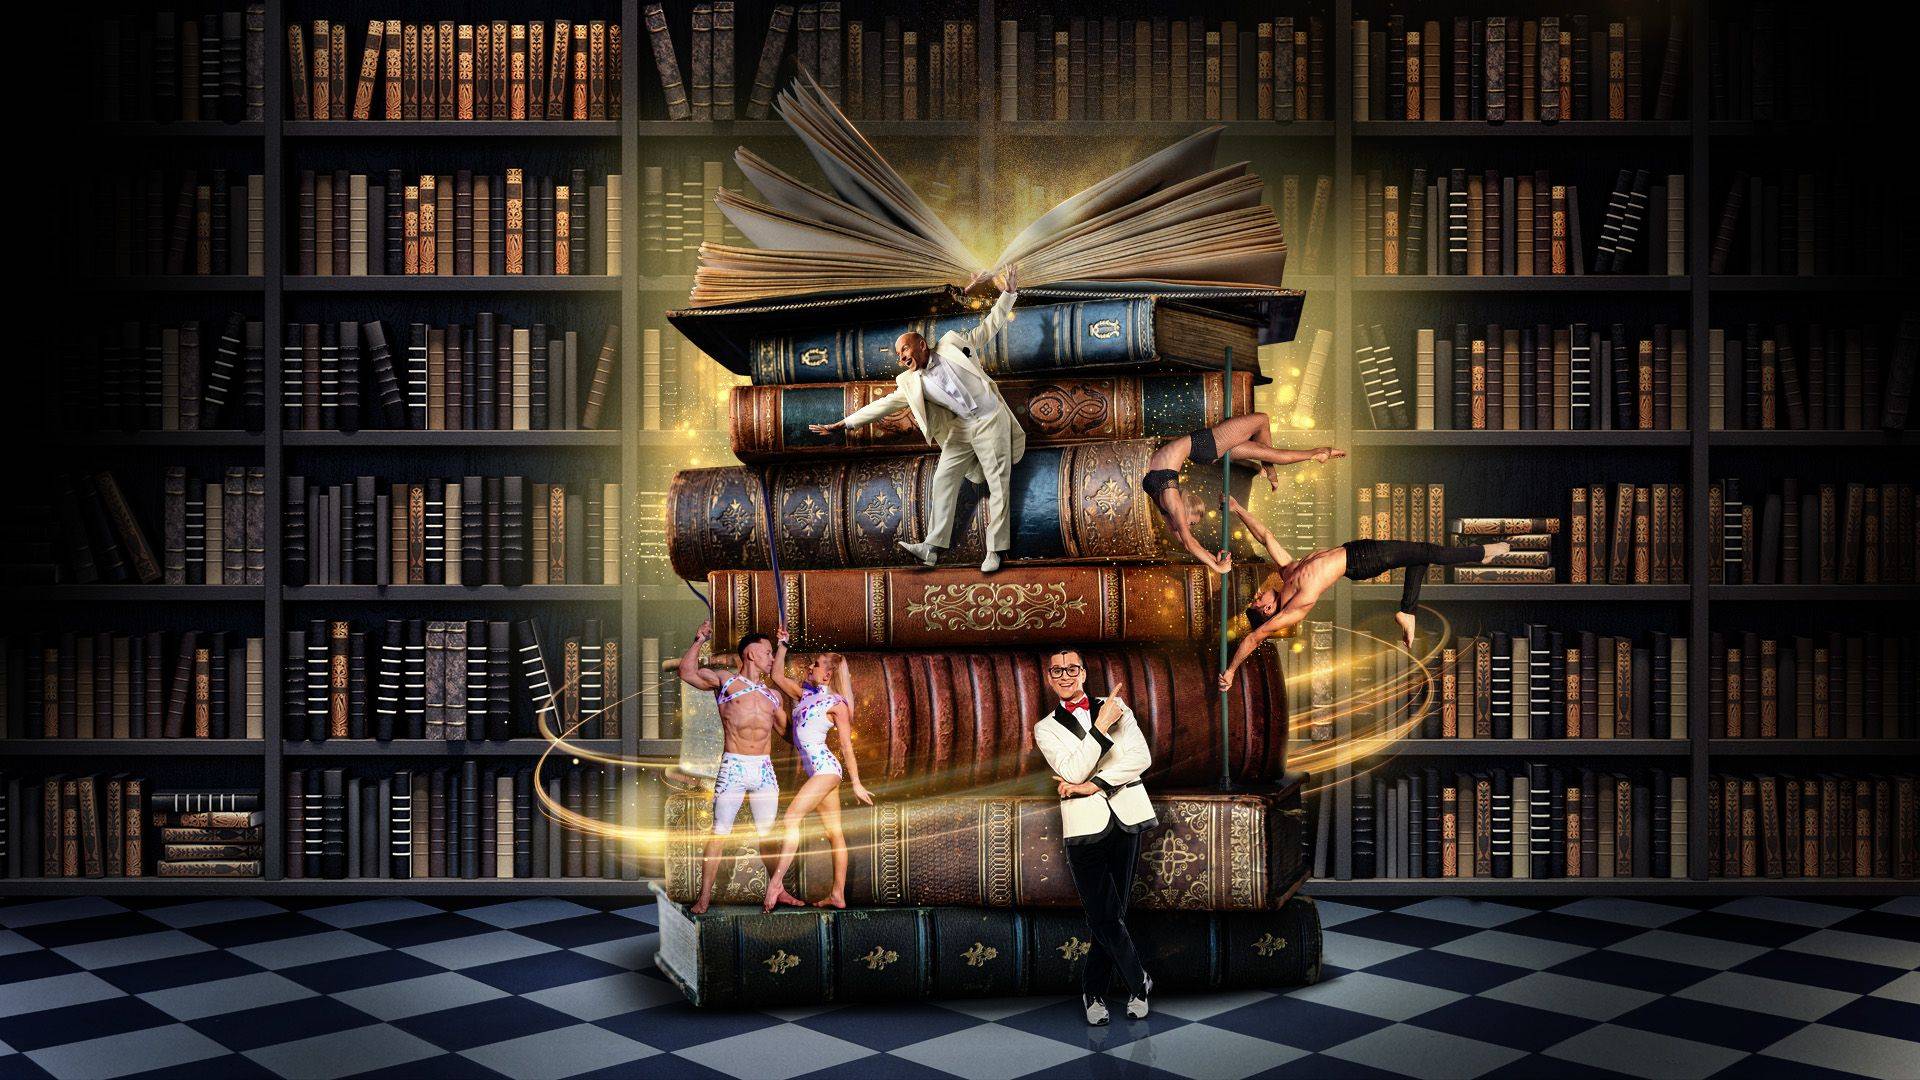 EP23_WME_086_Funny_Library_Two_Globe_Show_Banner_FullHD_POI_RZ